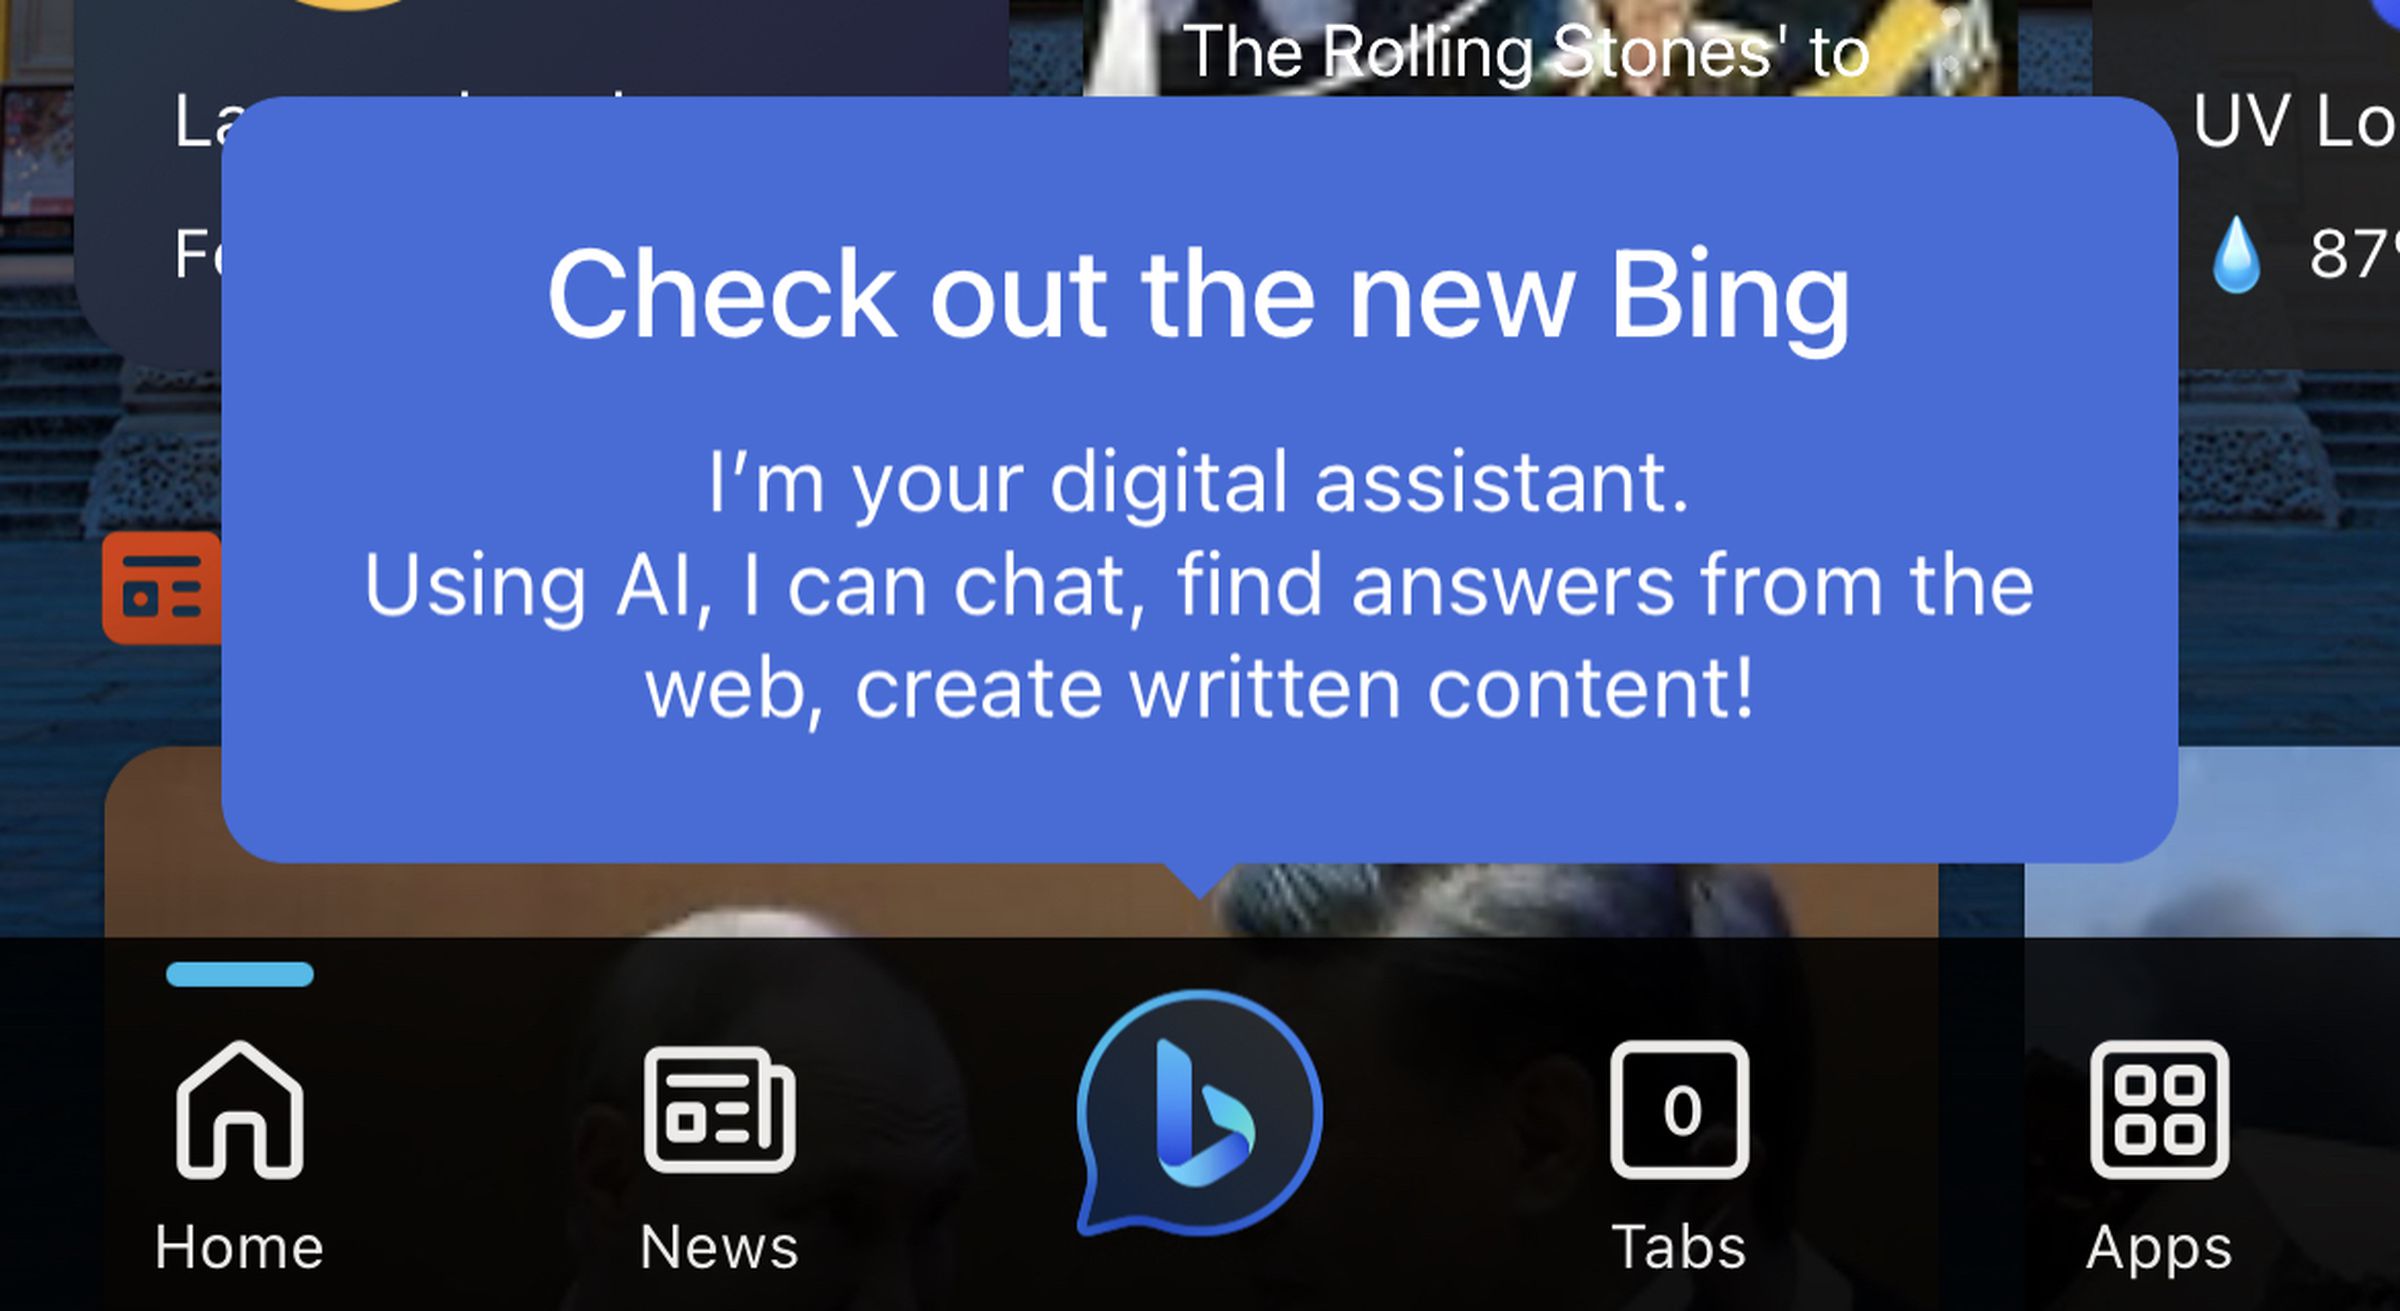 A screenshot of Bing’s mobile app saying “Check out the new Bing.”